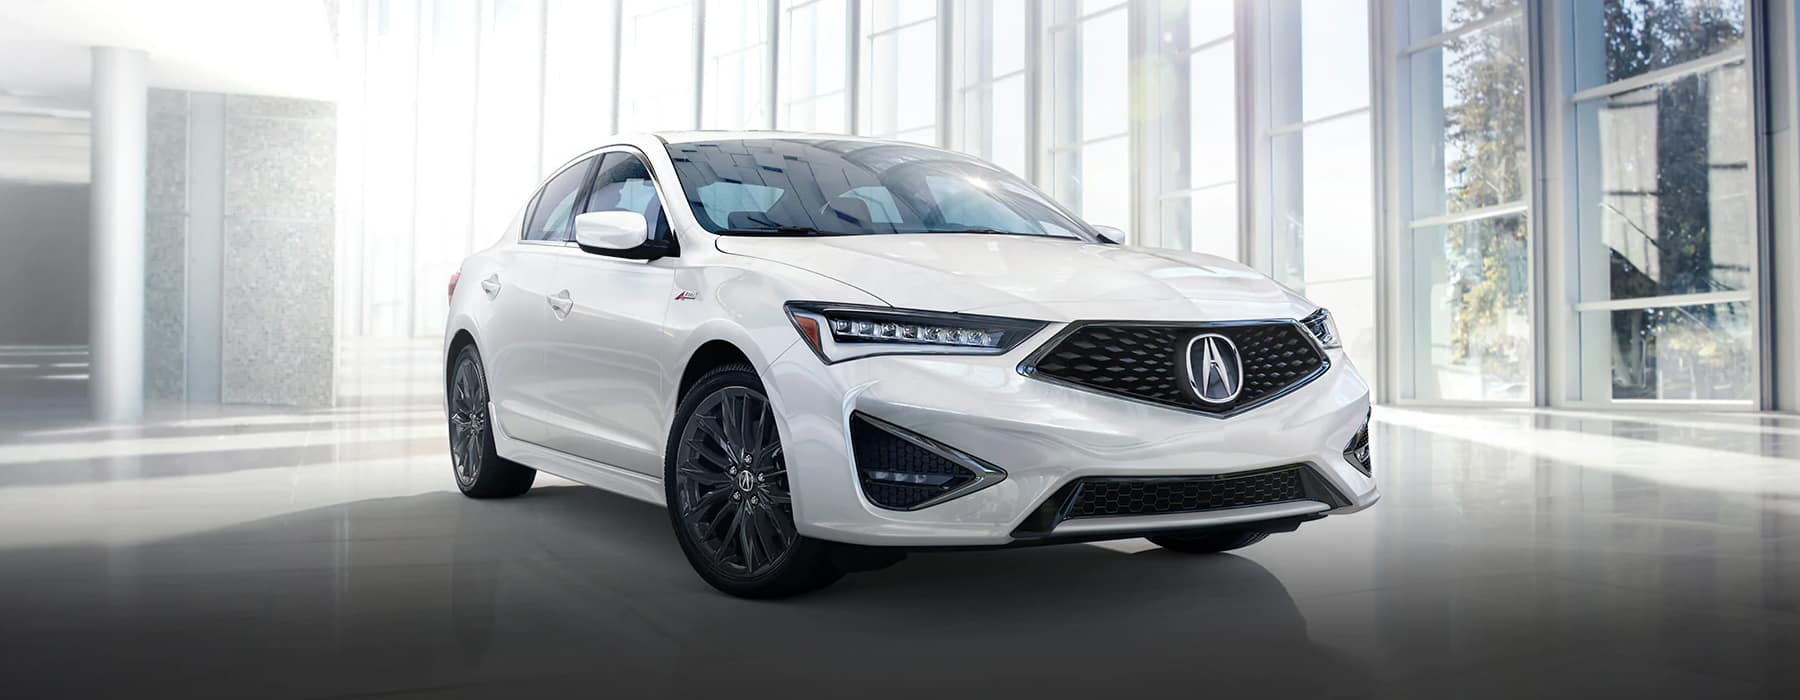 Will the 2021 Acura ILX be redesigned? | Vern Eide Acura in Sioux Falls